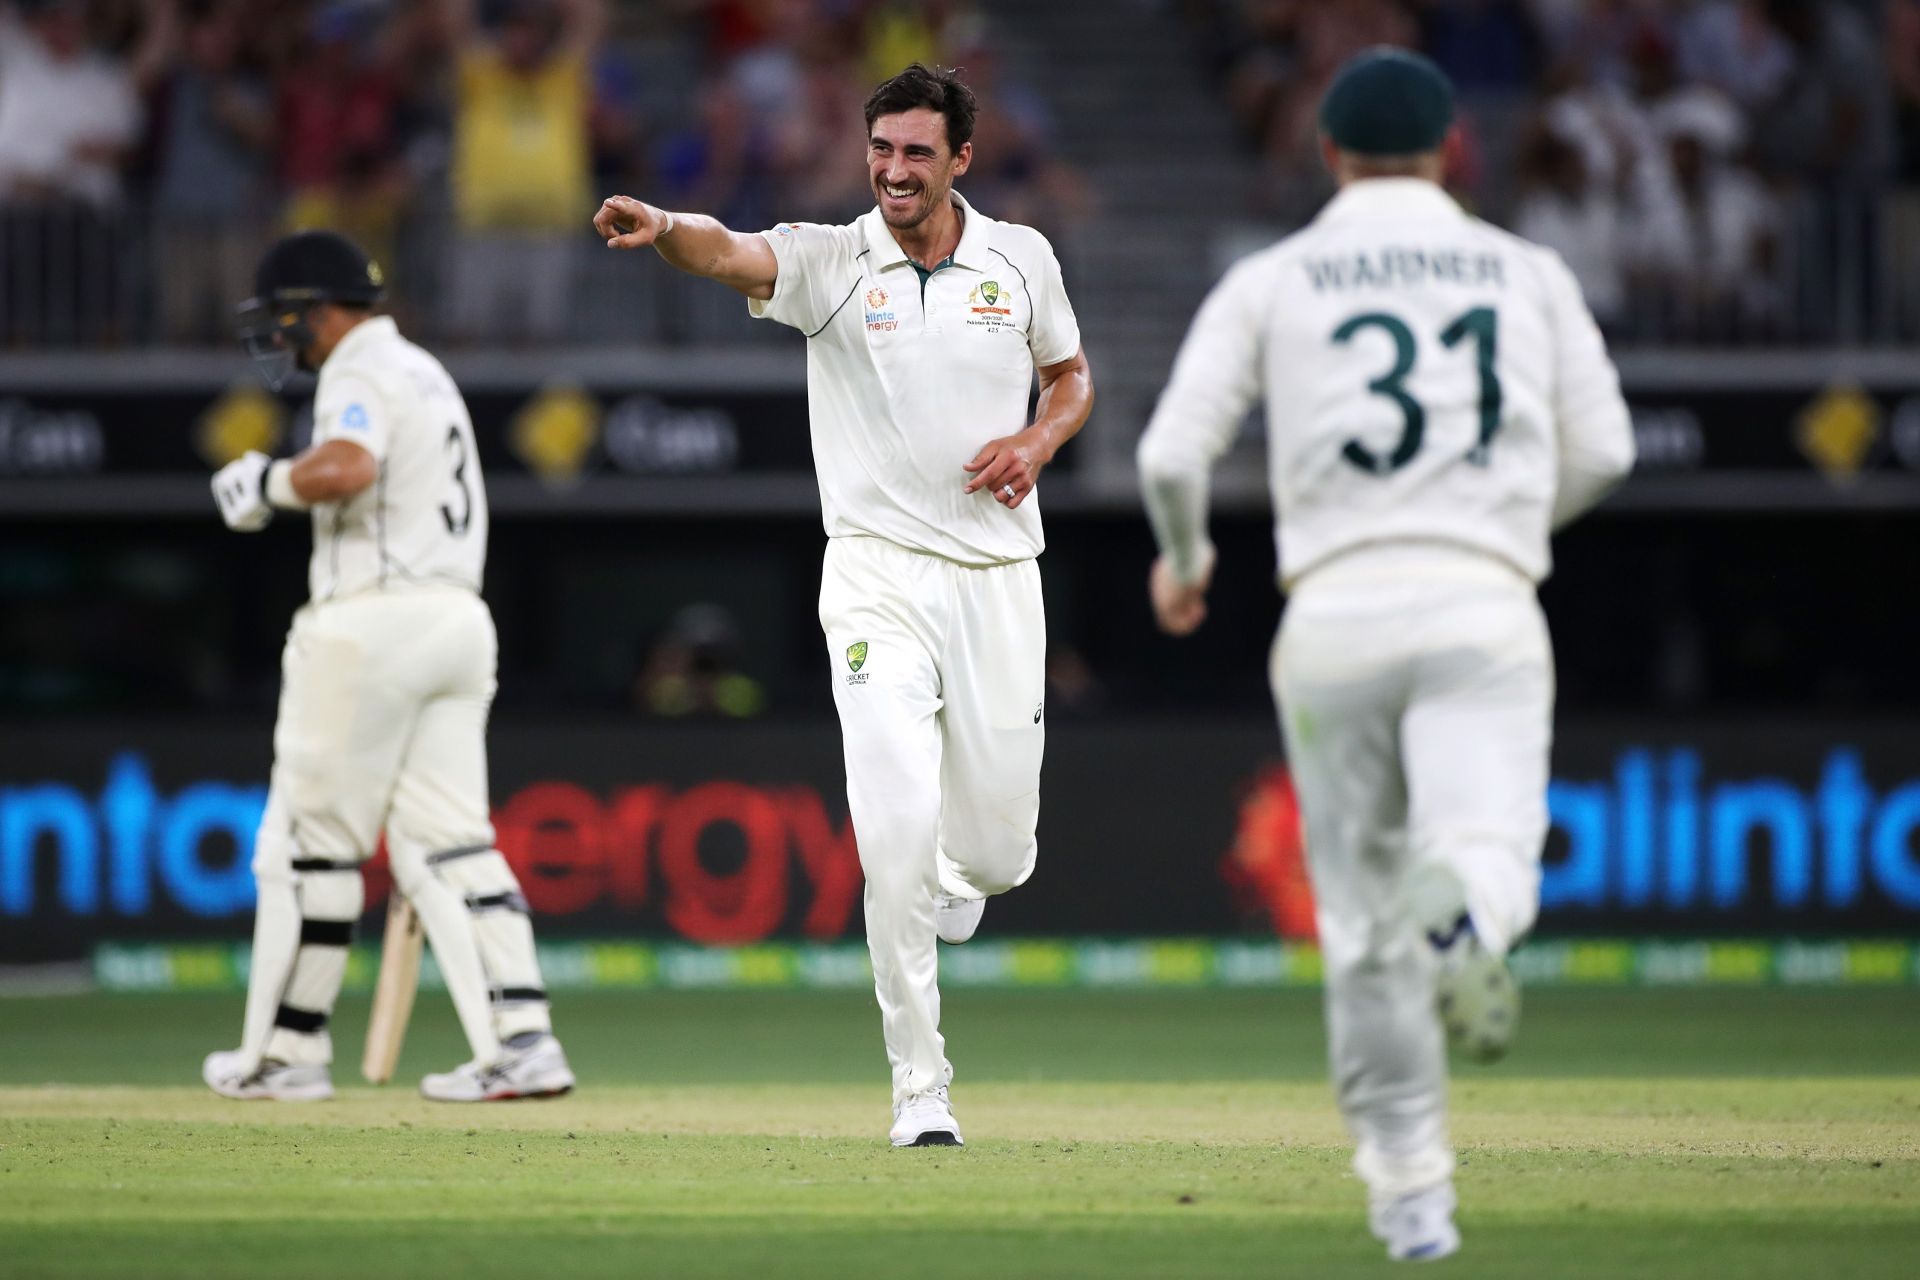 Mitchell Starc has not been at his best in Test cricket this year